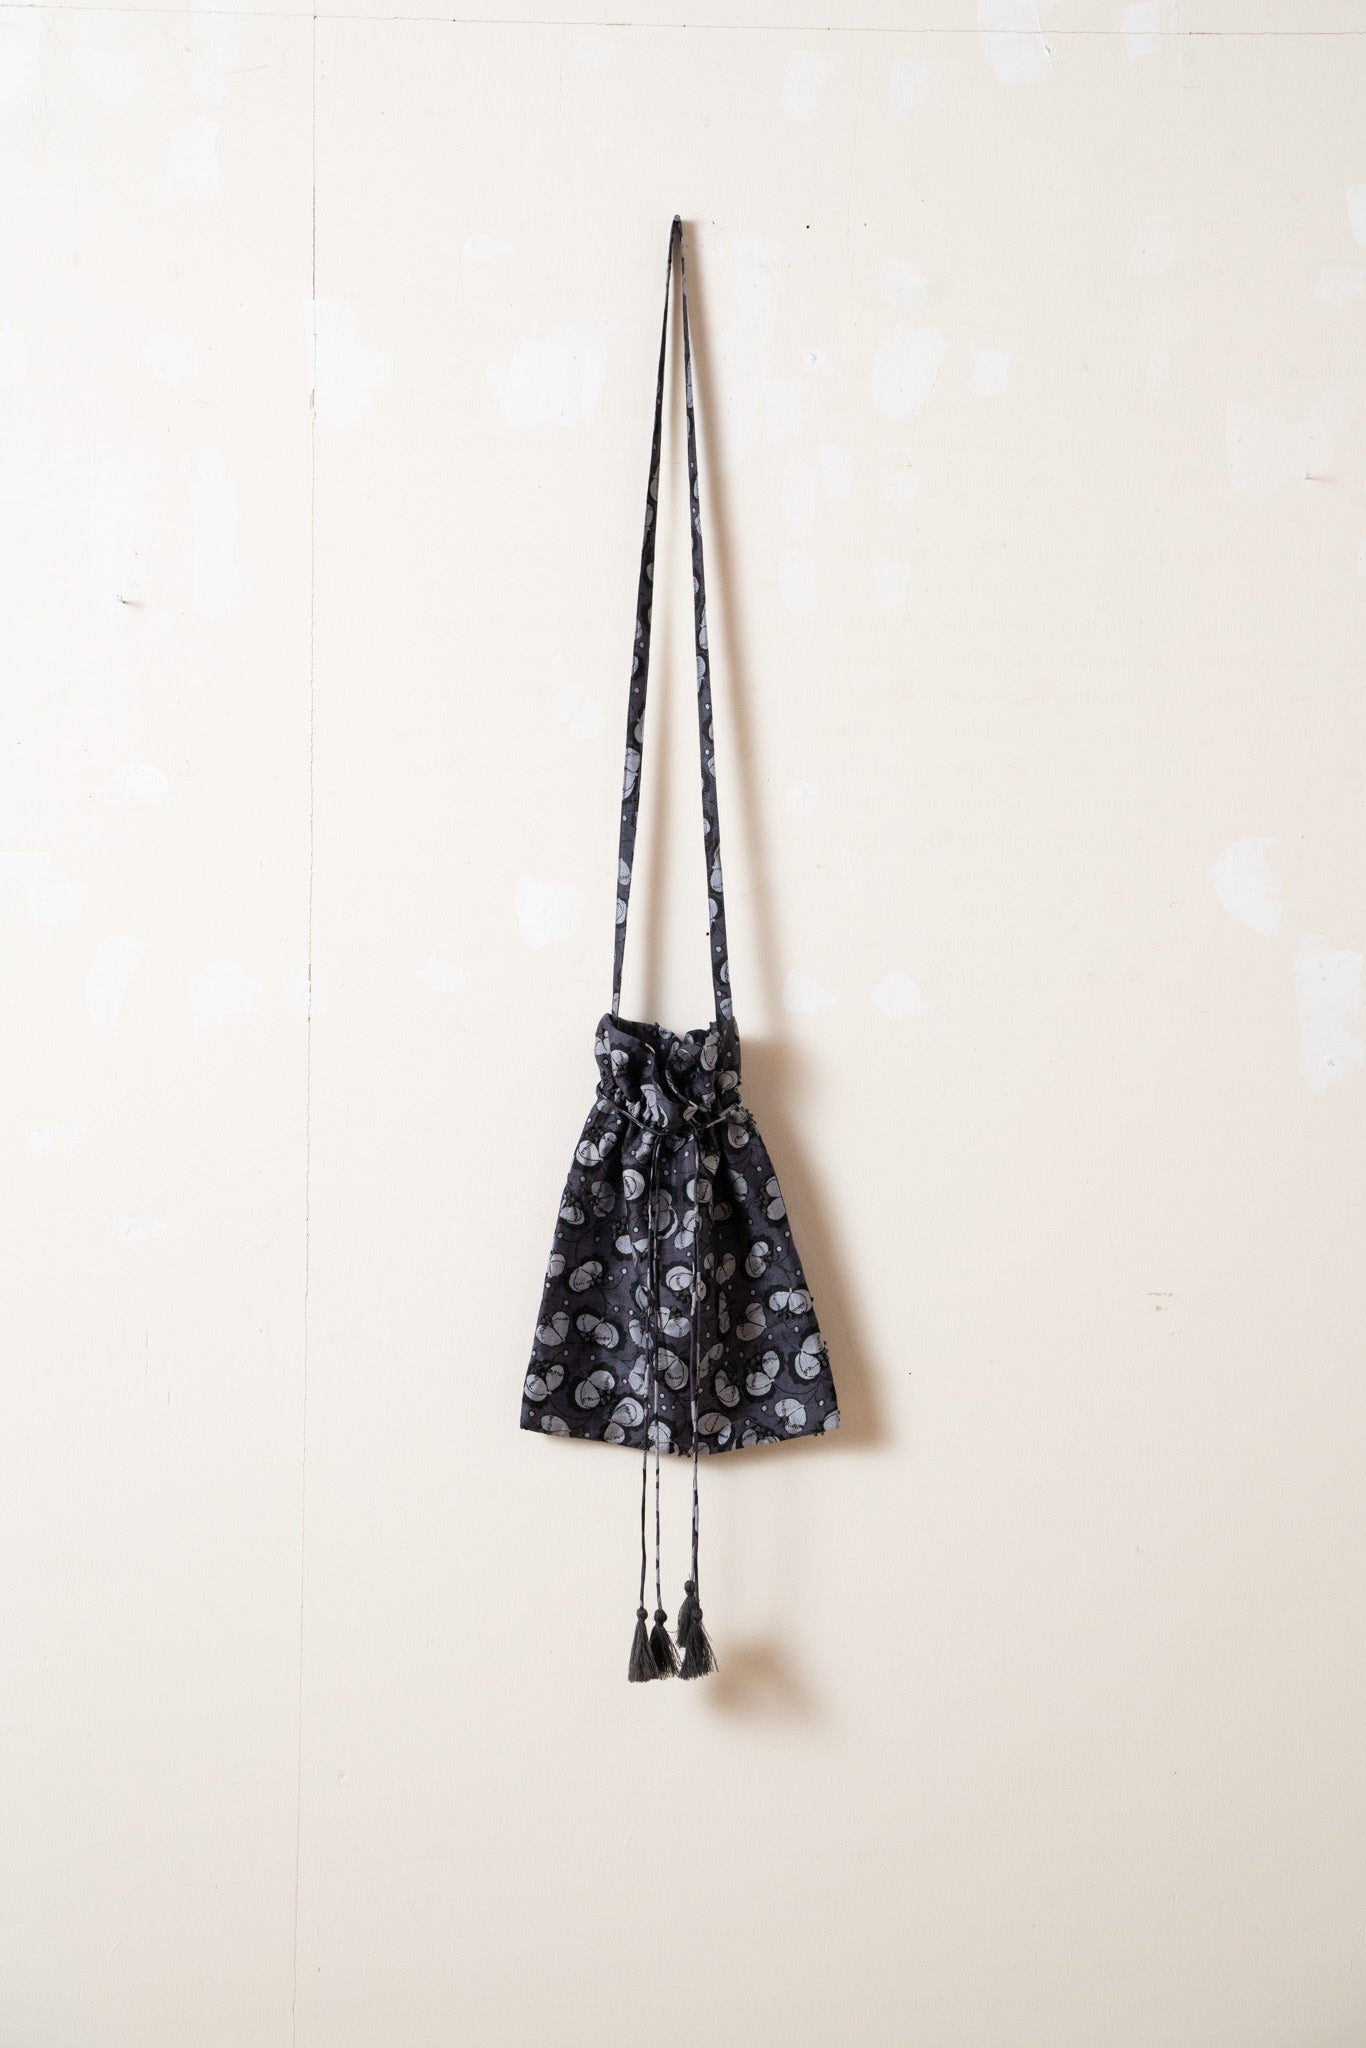 BUNON(ブノン)　カディシルク　all embroidery drawstring bag 【charcoal】